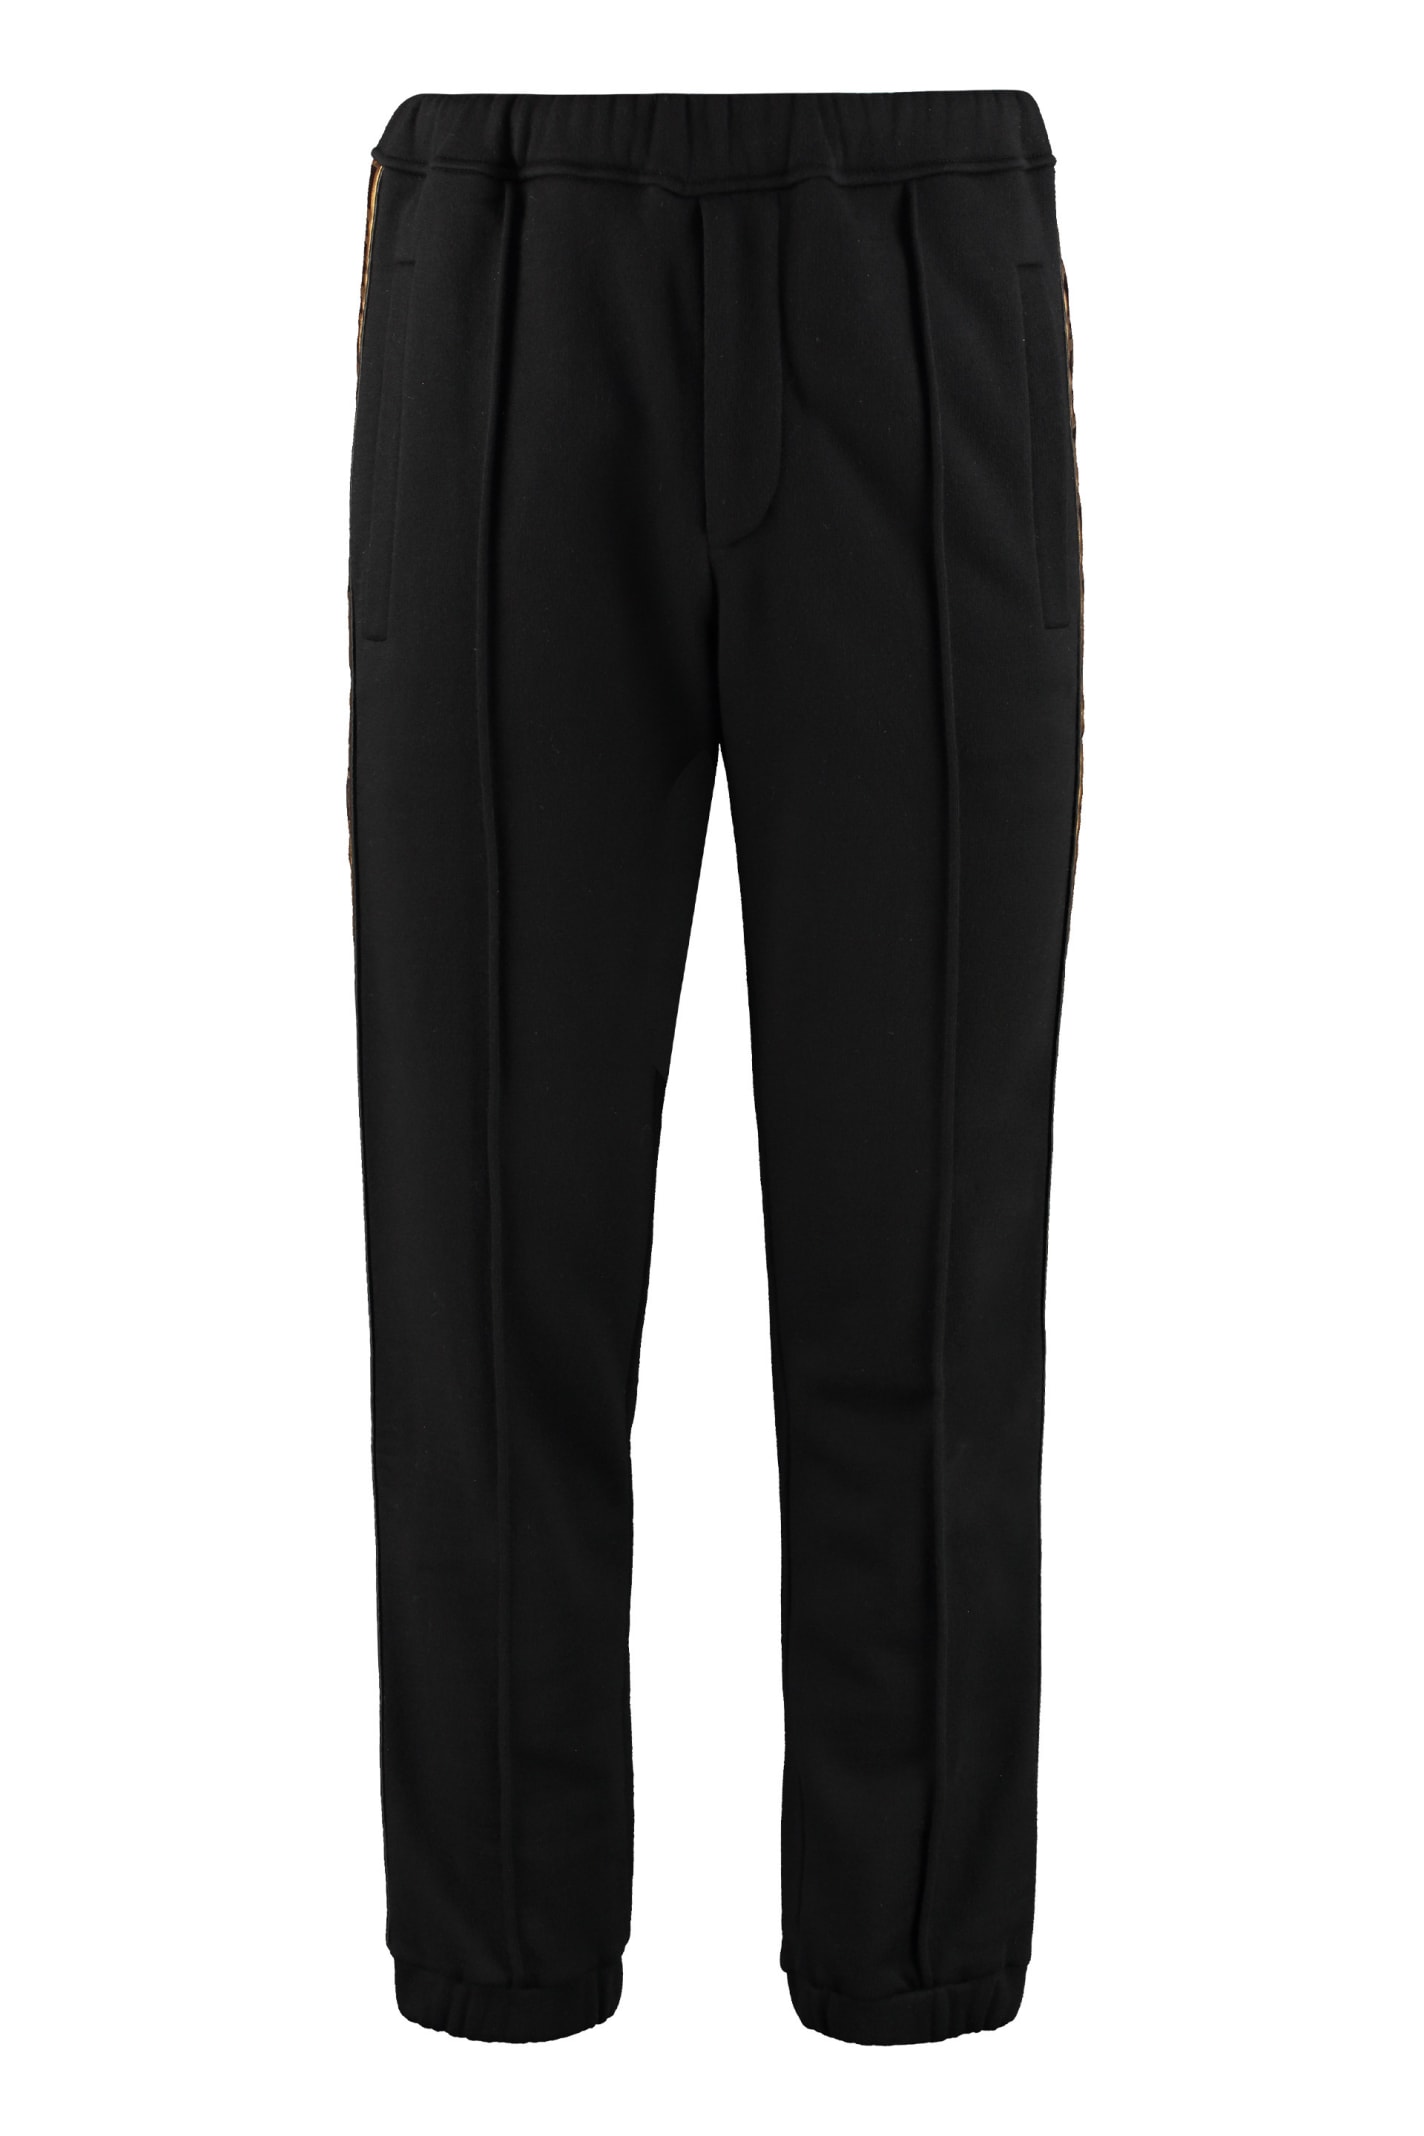 Fendi Track-pants With Logoed Side Stripes In Black